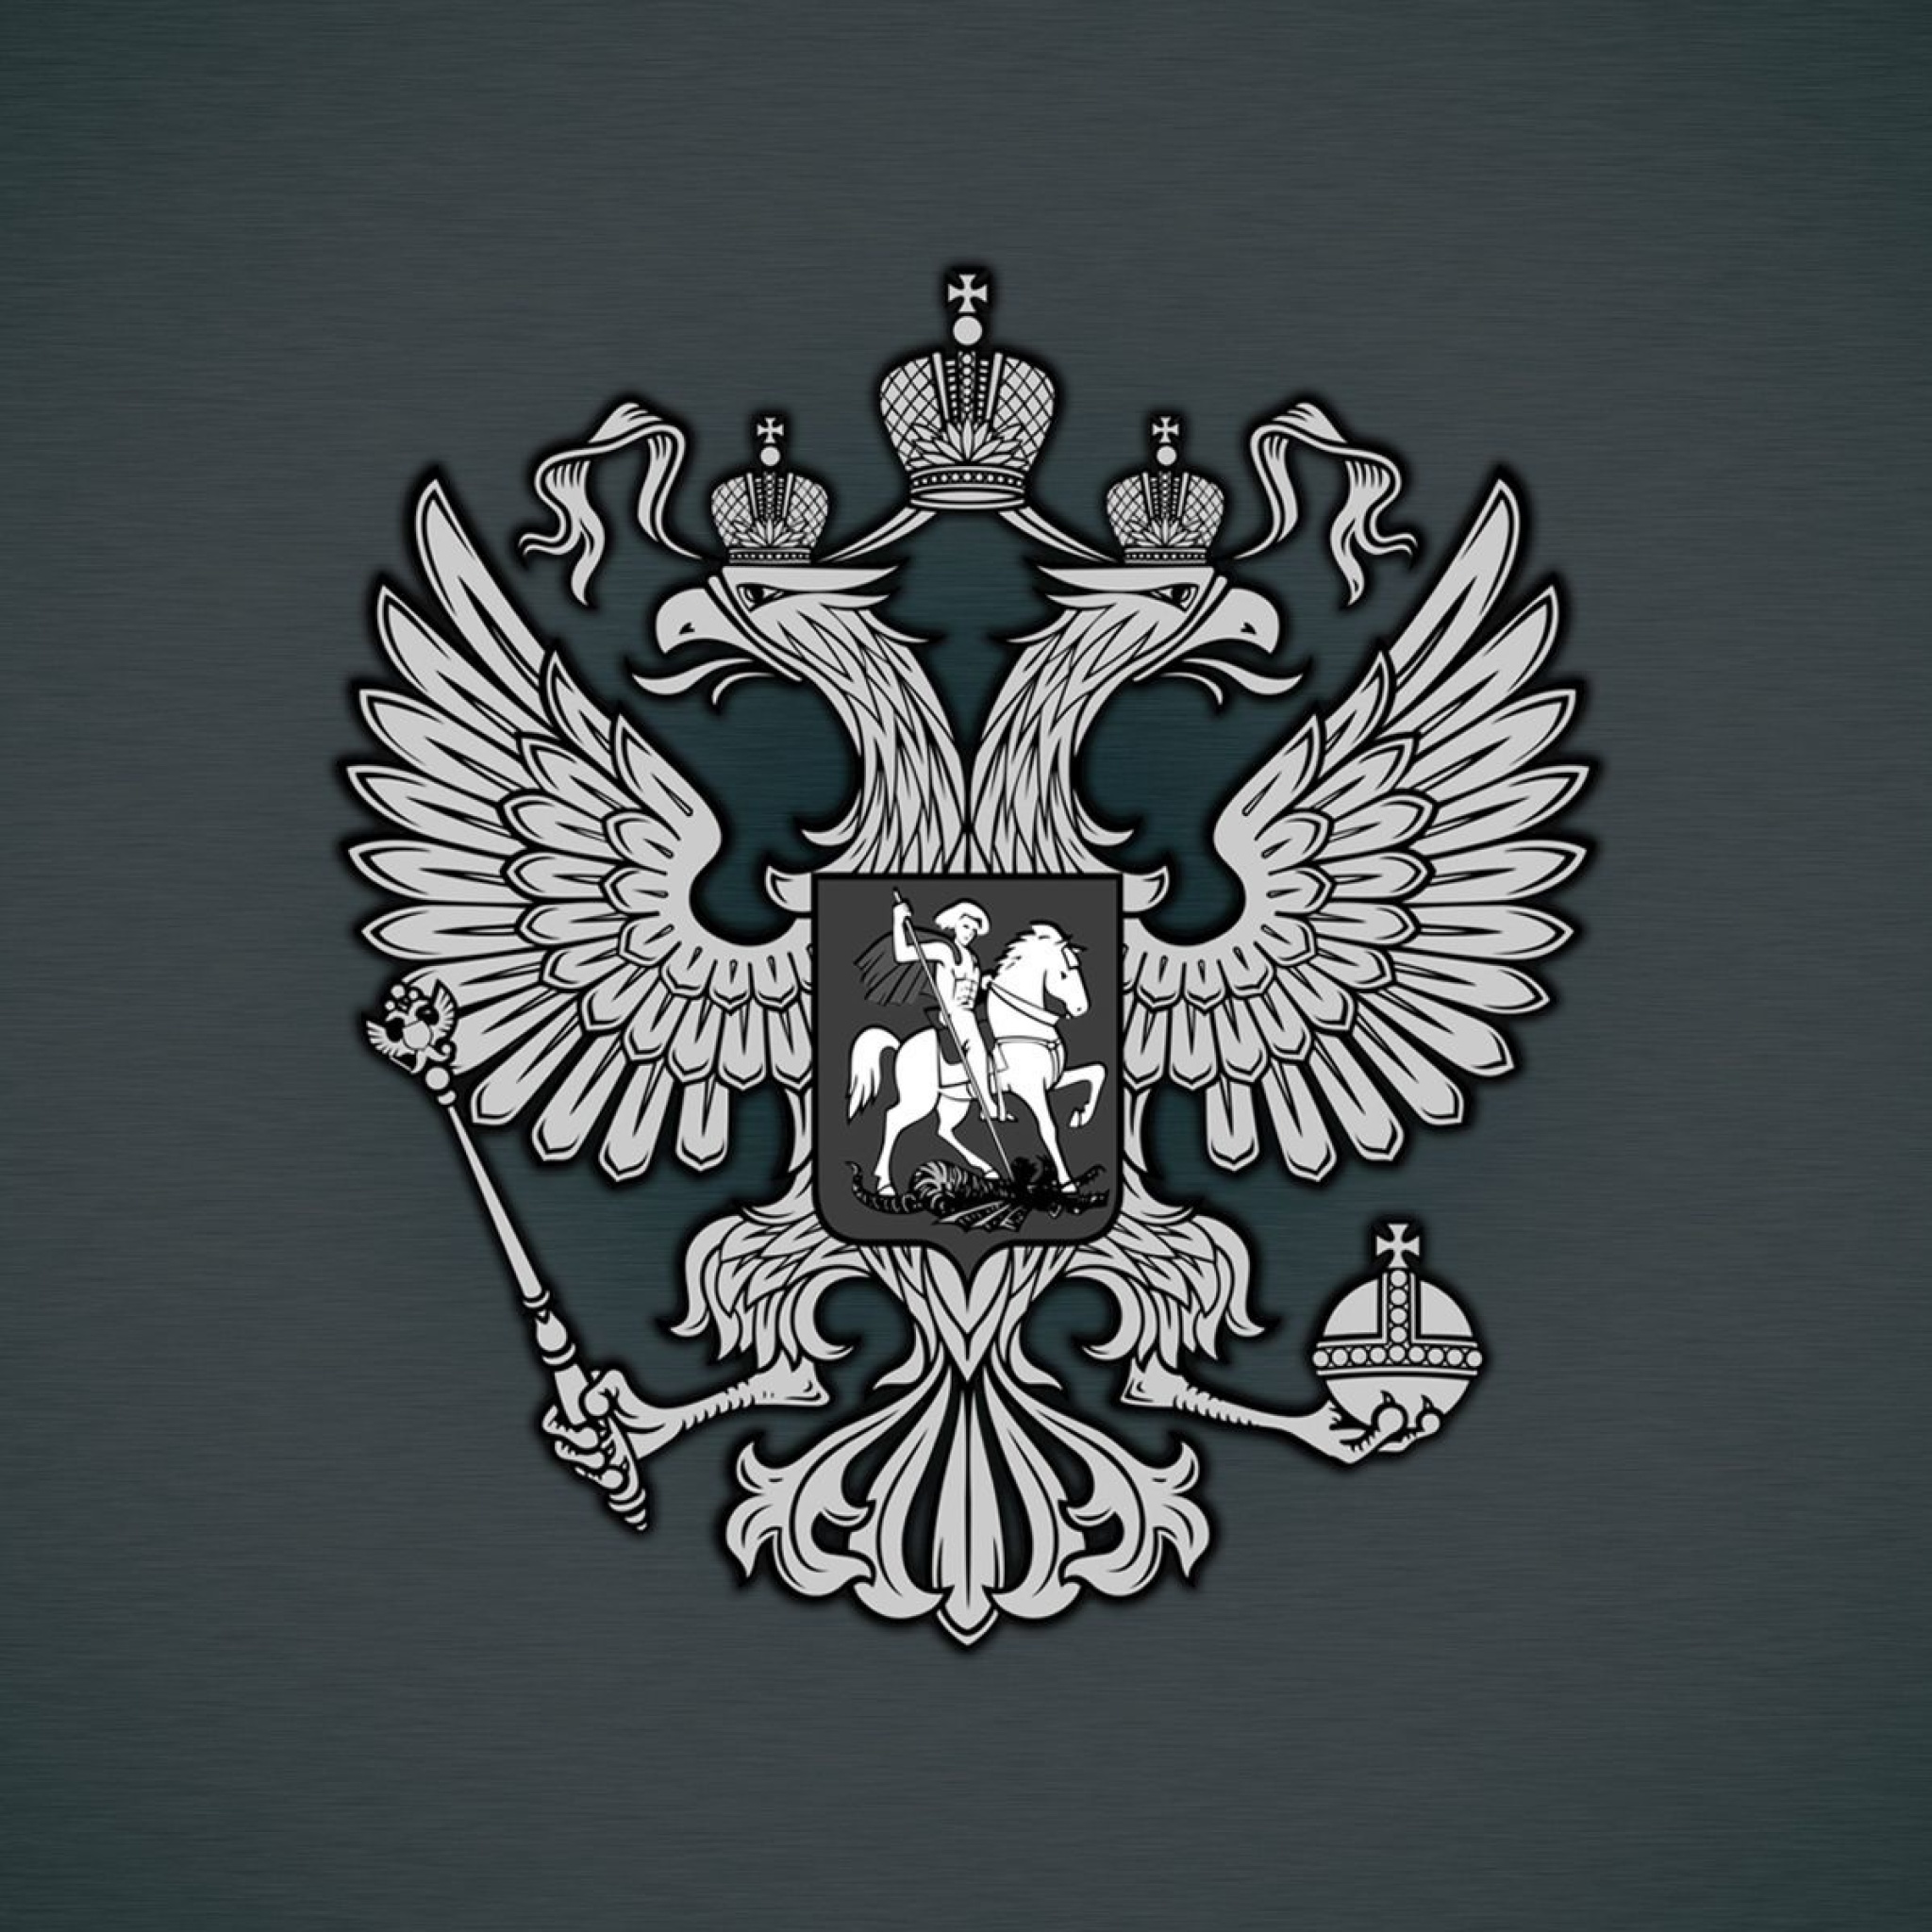 Coat of arms of Russia wallpaper 2048x2048